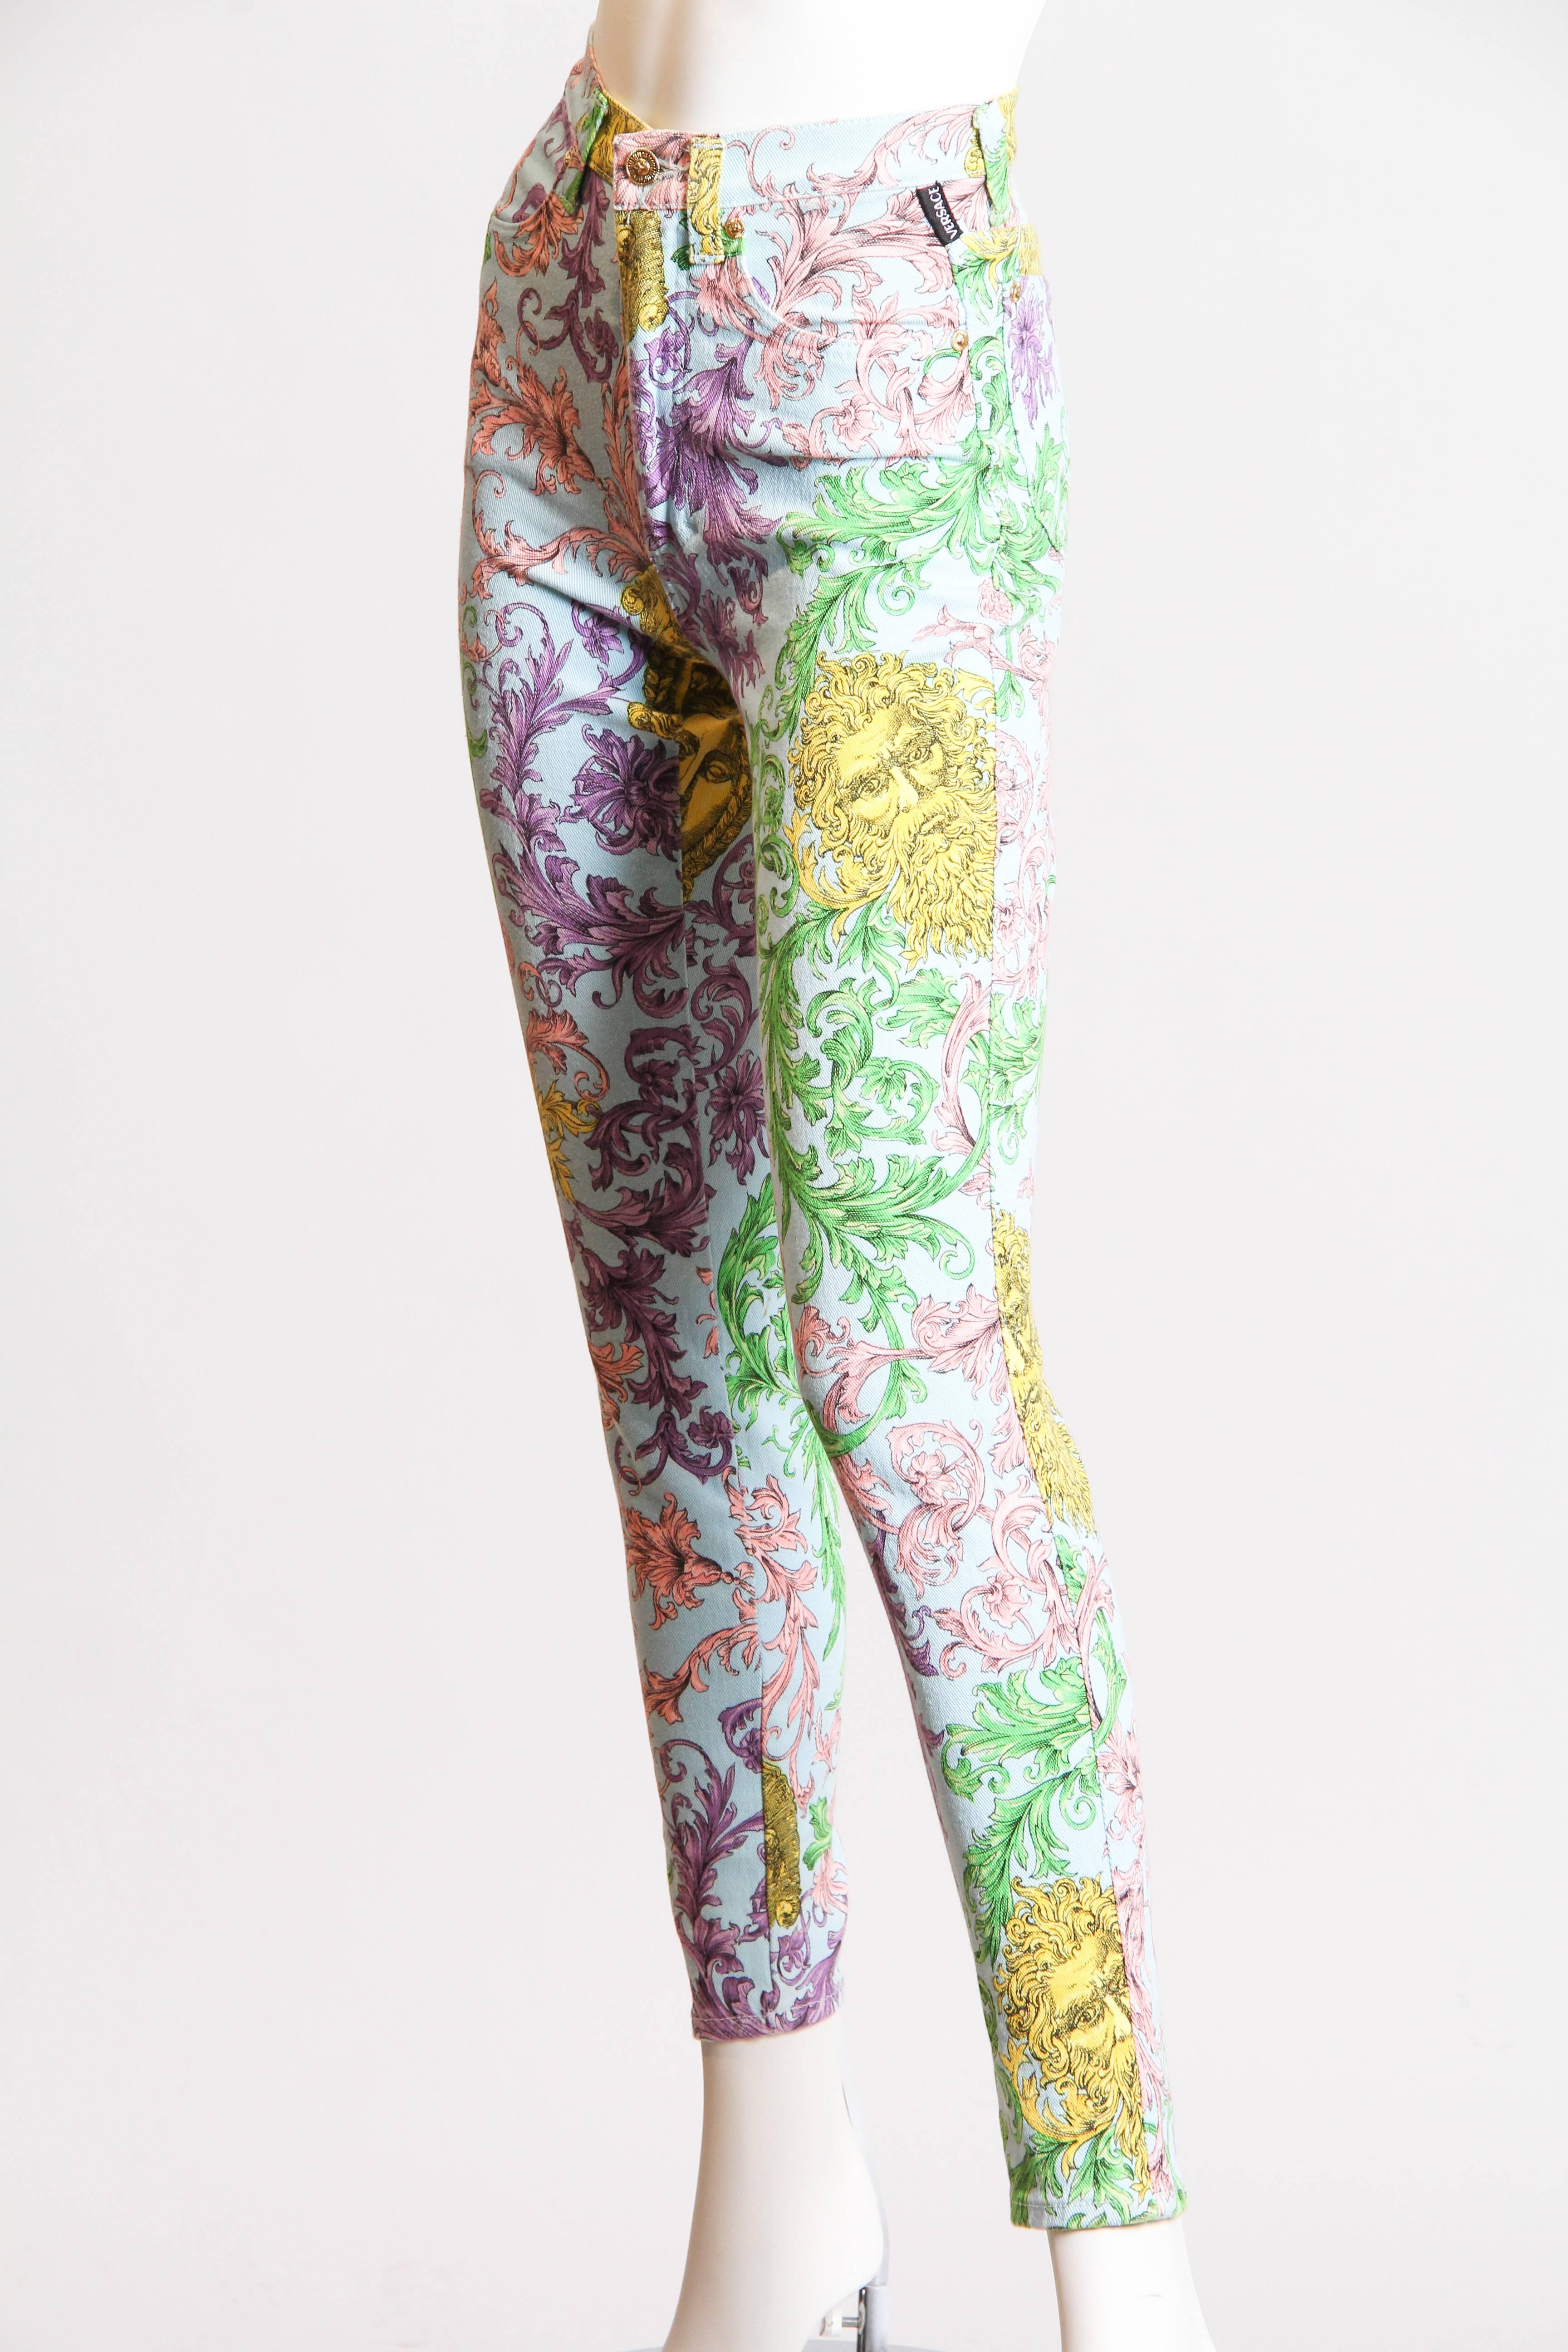 These jeans are part of Versace's ode to historical scrollwork and florals, reimagined for the modern world. Deep historical shades have become cheerful pastels in Versace's design, and the damask florals have been flipped and re-curved across the